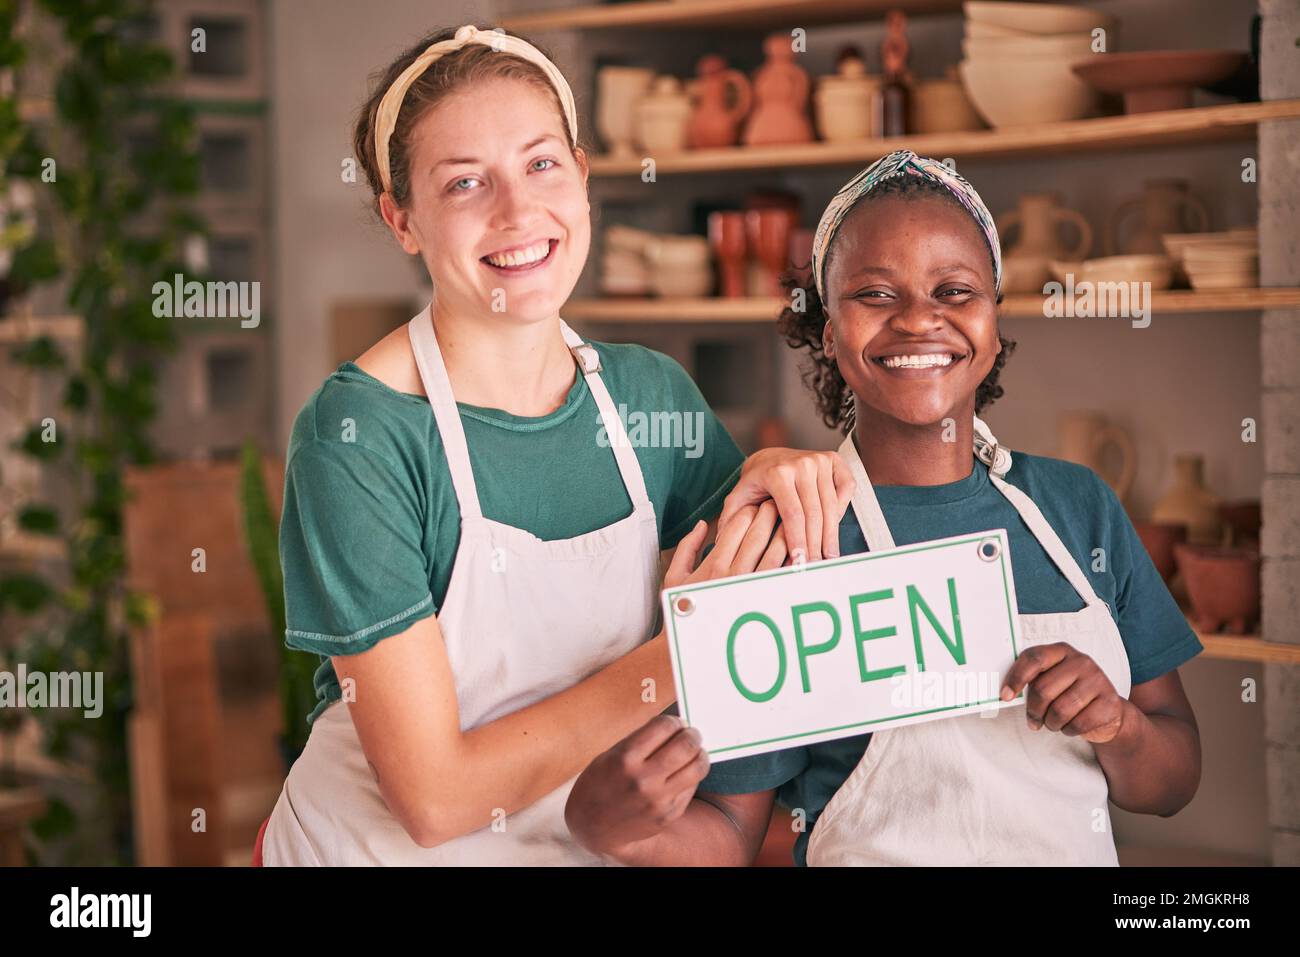 Small business, pottery and women team with open sign for creative workshop, art studio and startup. Smile, teamwork and entrepreneurs ready for Stock Photo